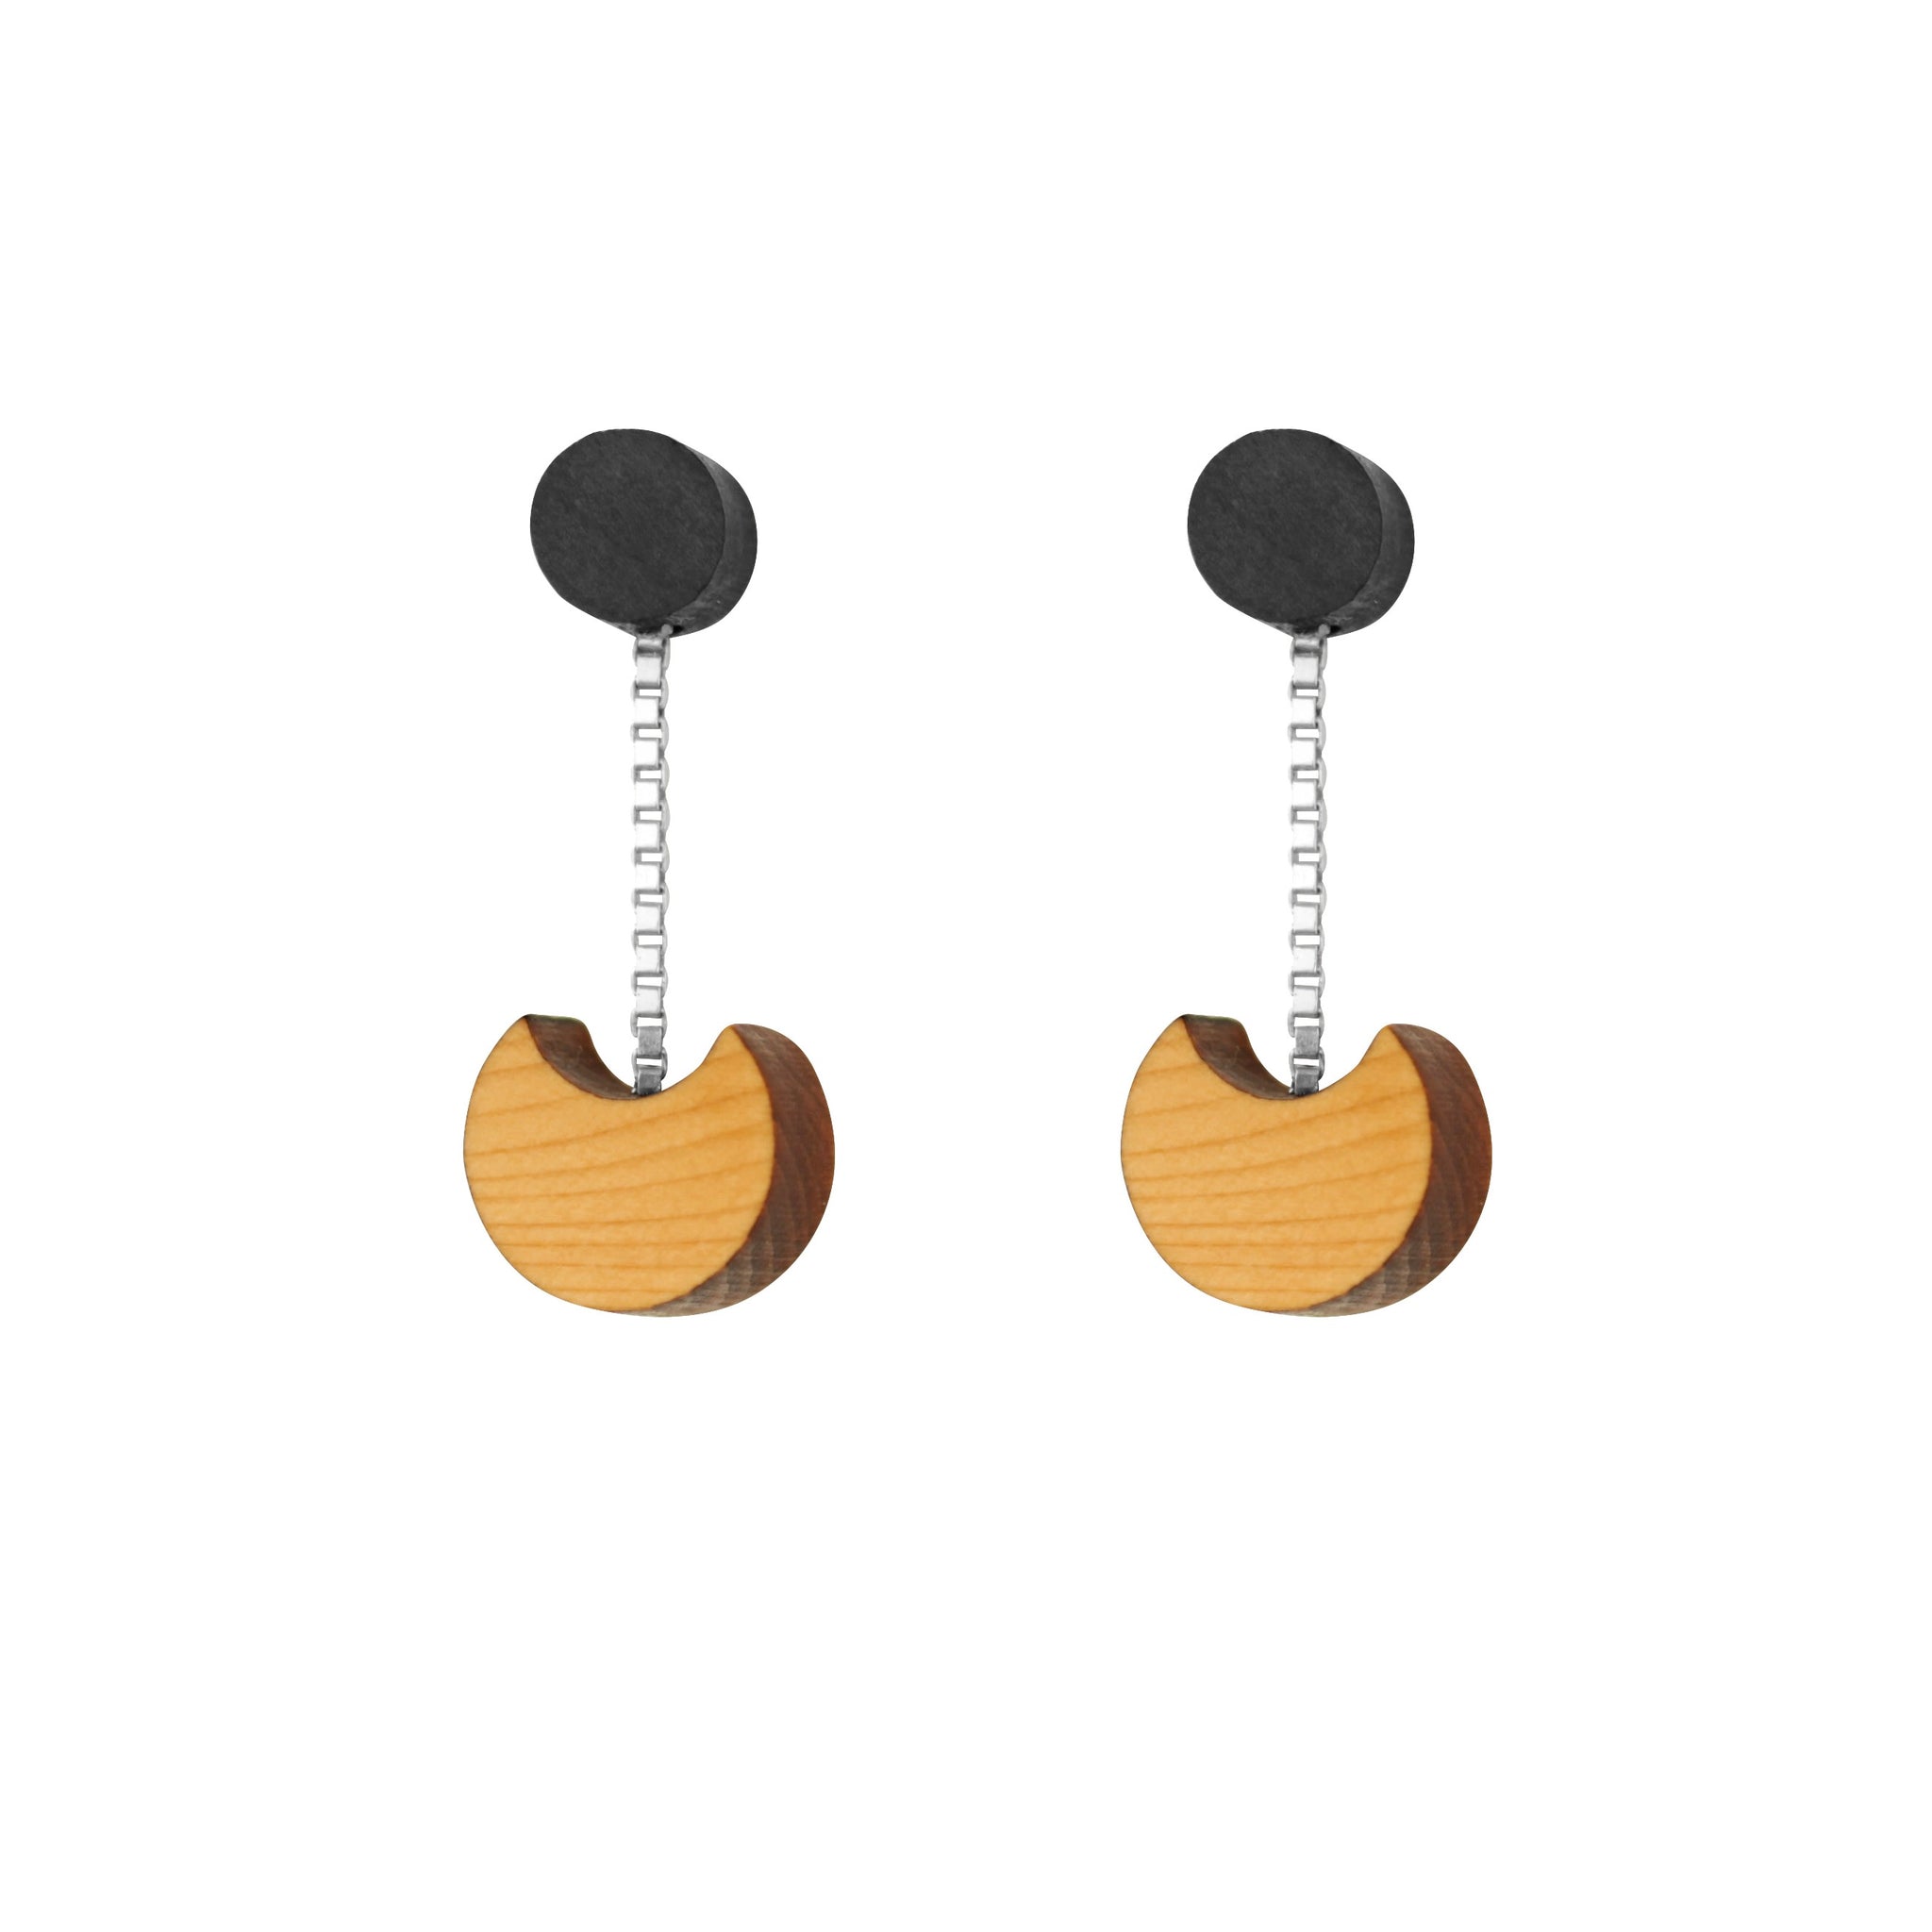 Yew wood and sterling silver dainty drop earrings in natural wood with black stud  - handmade in Ireland by jewellery designer Rowena Sheen 